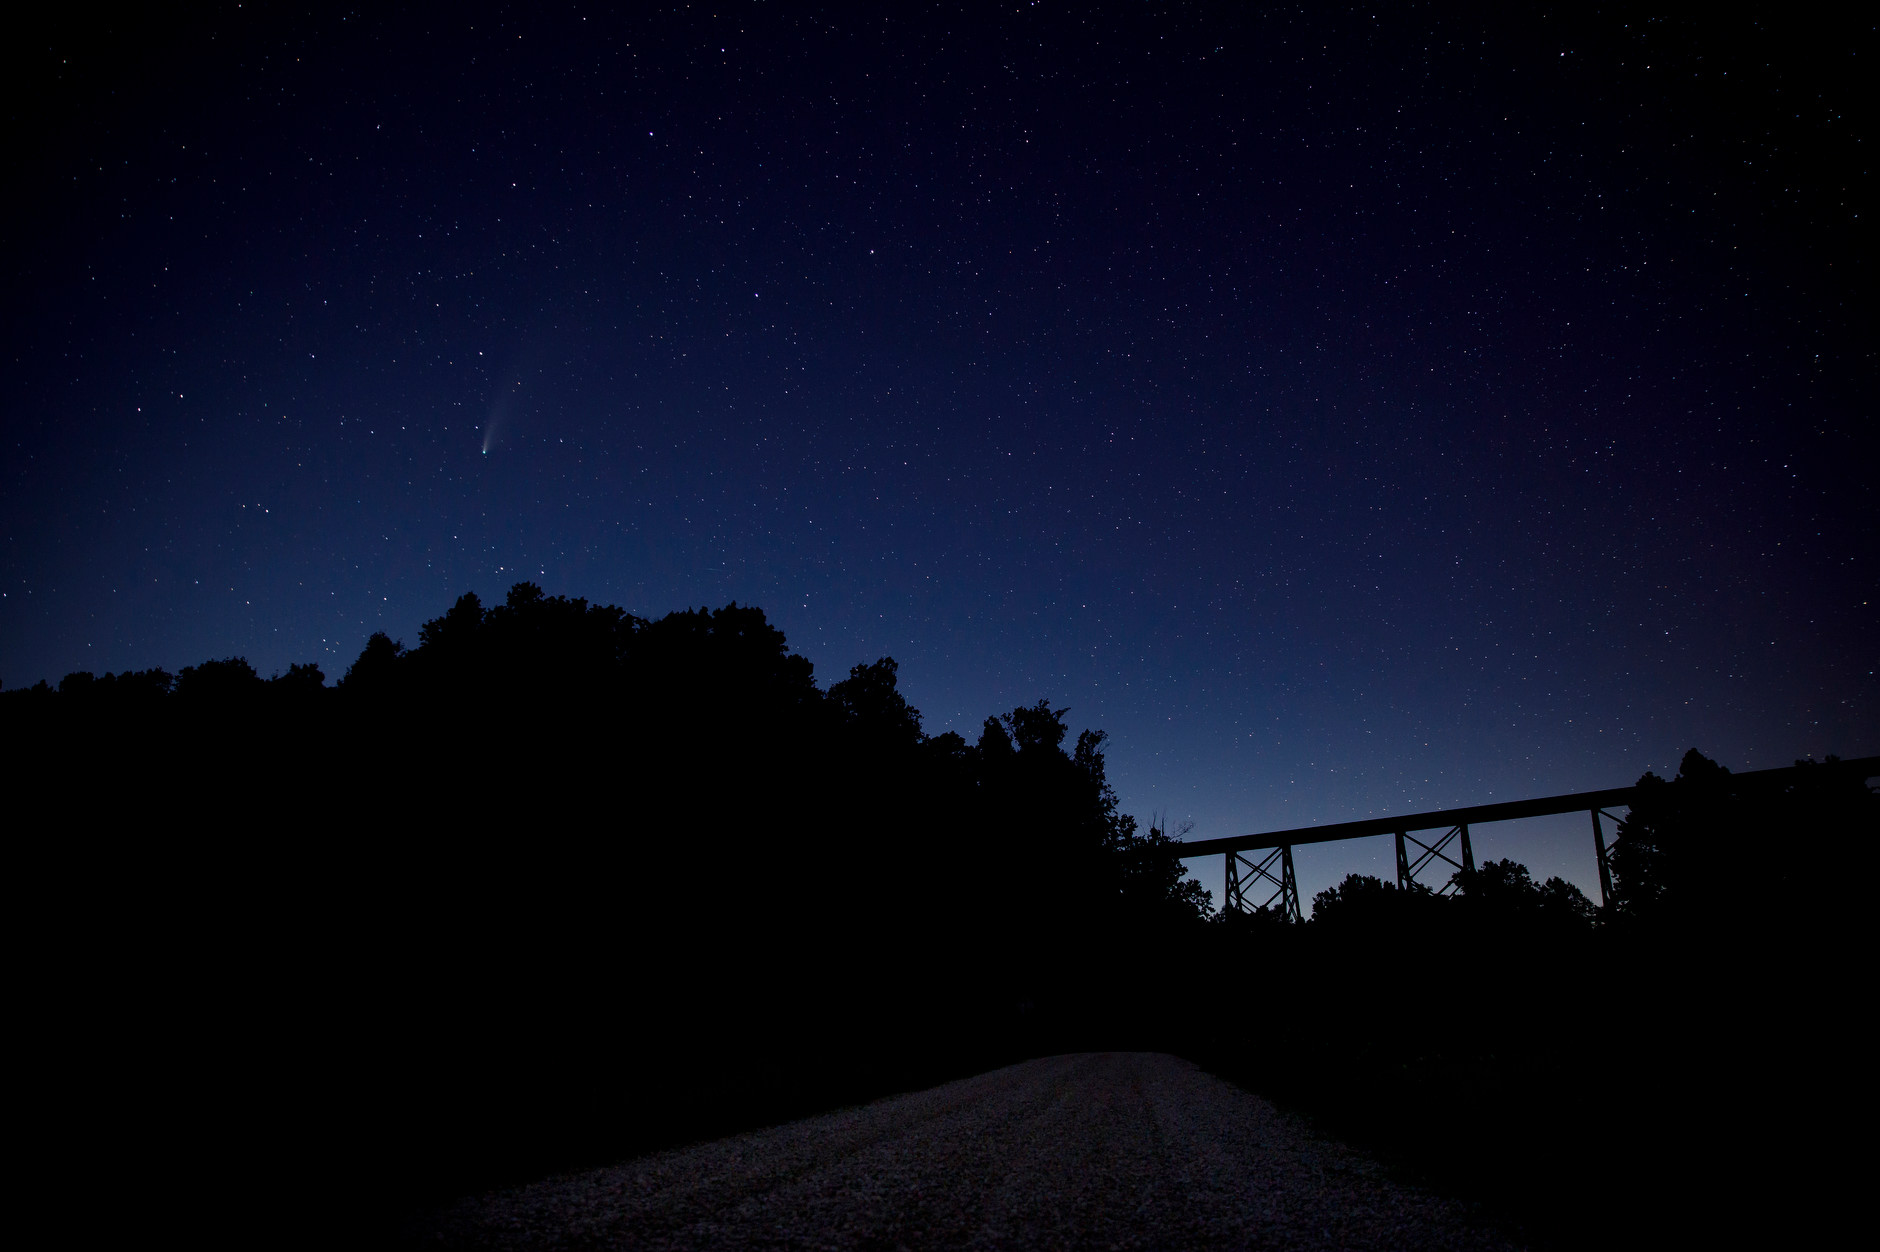 Comet NEOWISE is seen in the night sky near the Tulip Viaduct, pictured in silhouette at right, in rural Greene County, Indiana on Thursday, July 23, 2020. (Photo by James Brosher)